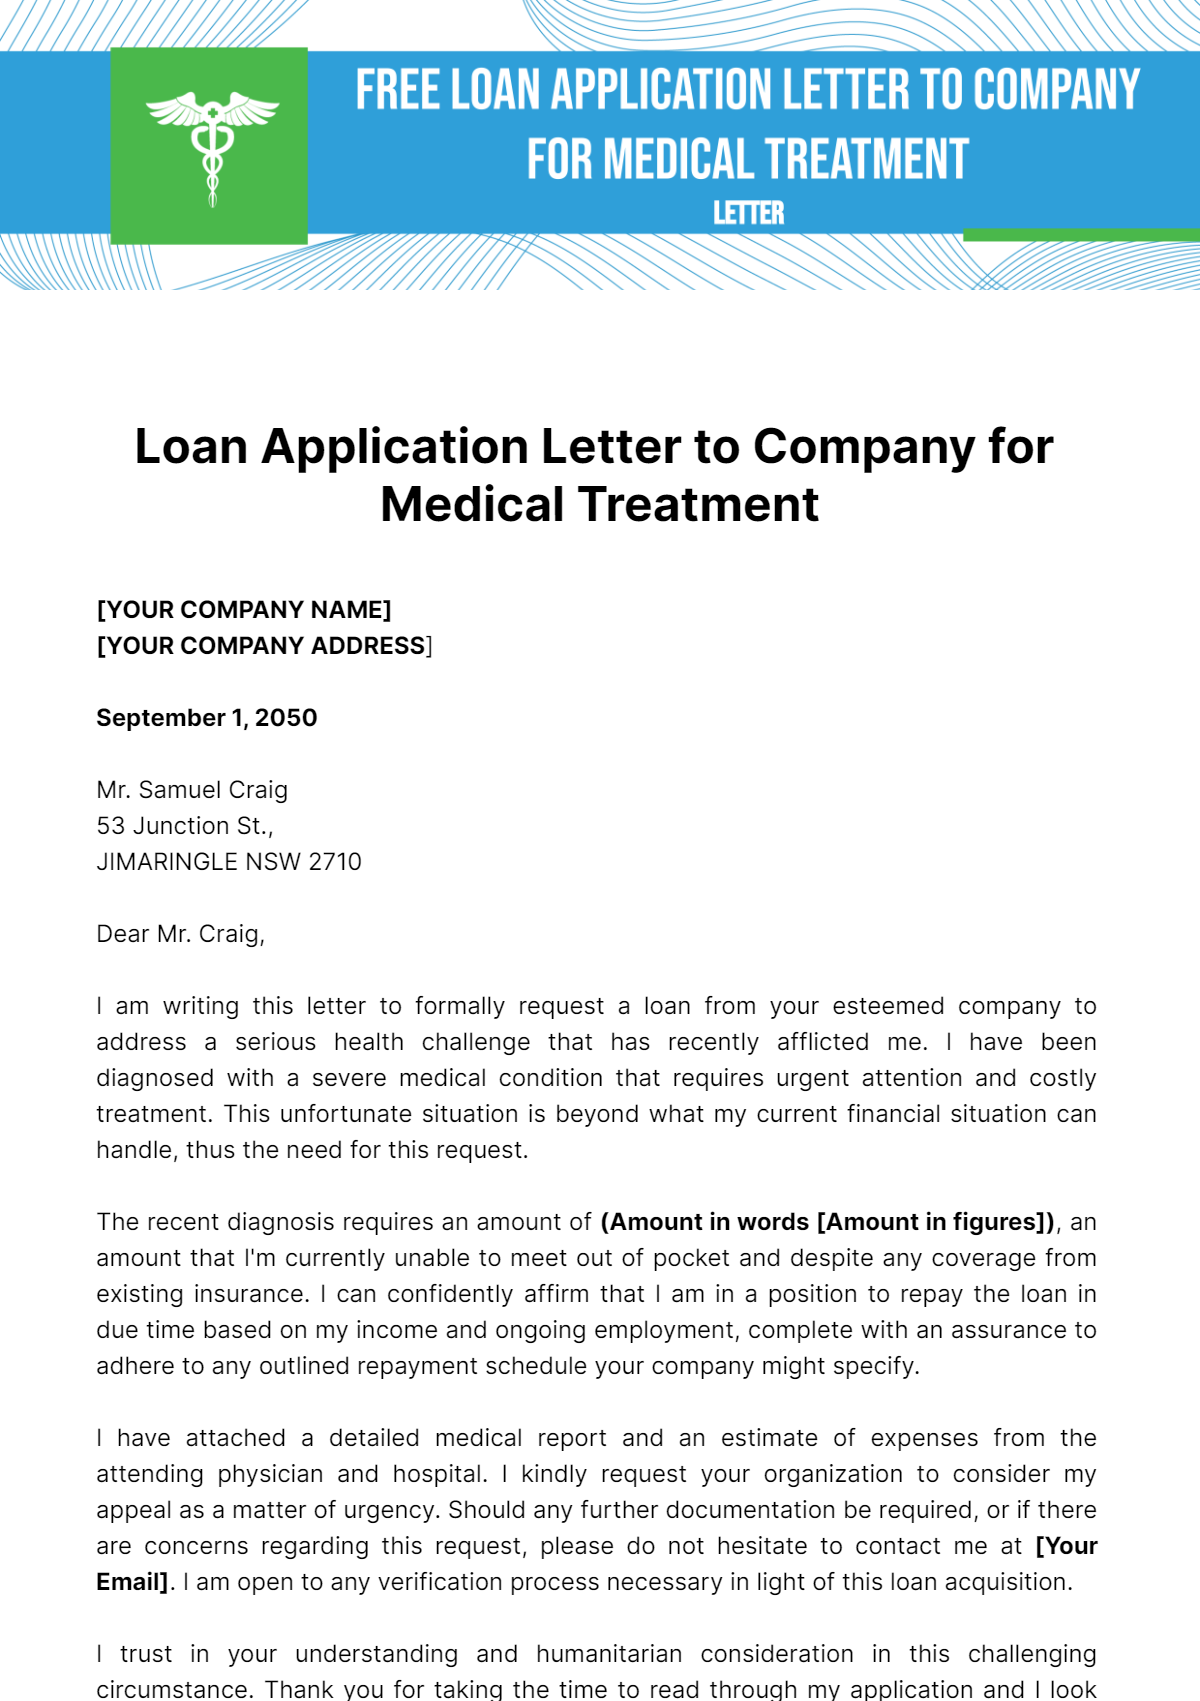 Free Loan Application Letter to Company for Medical Treatment Template